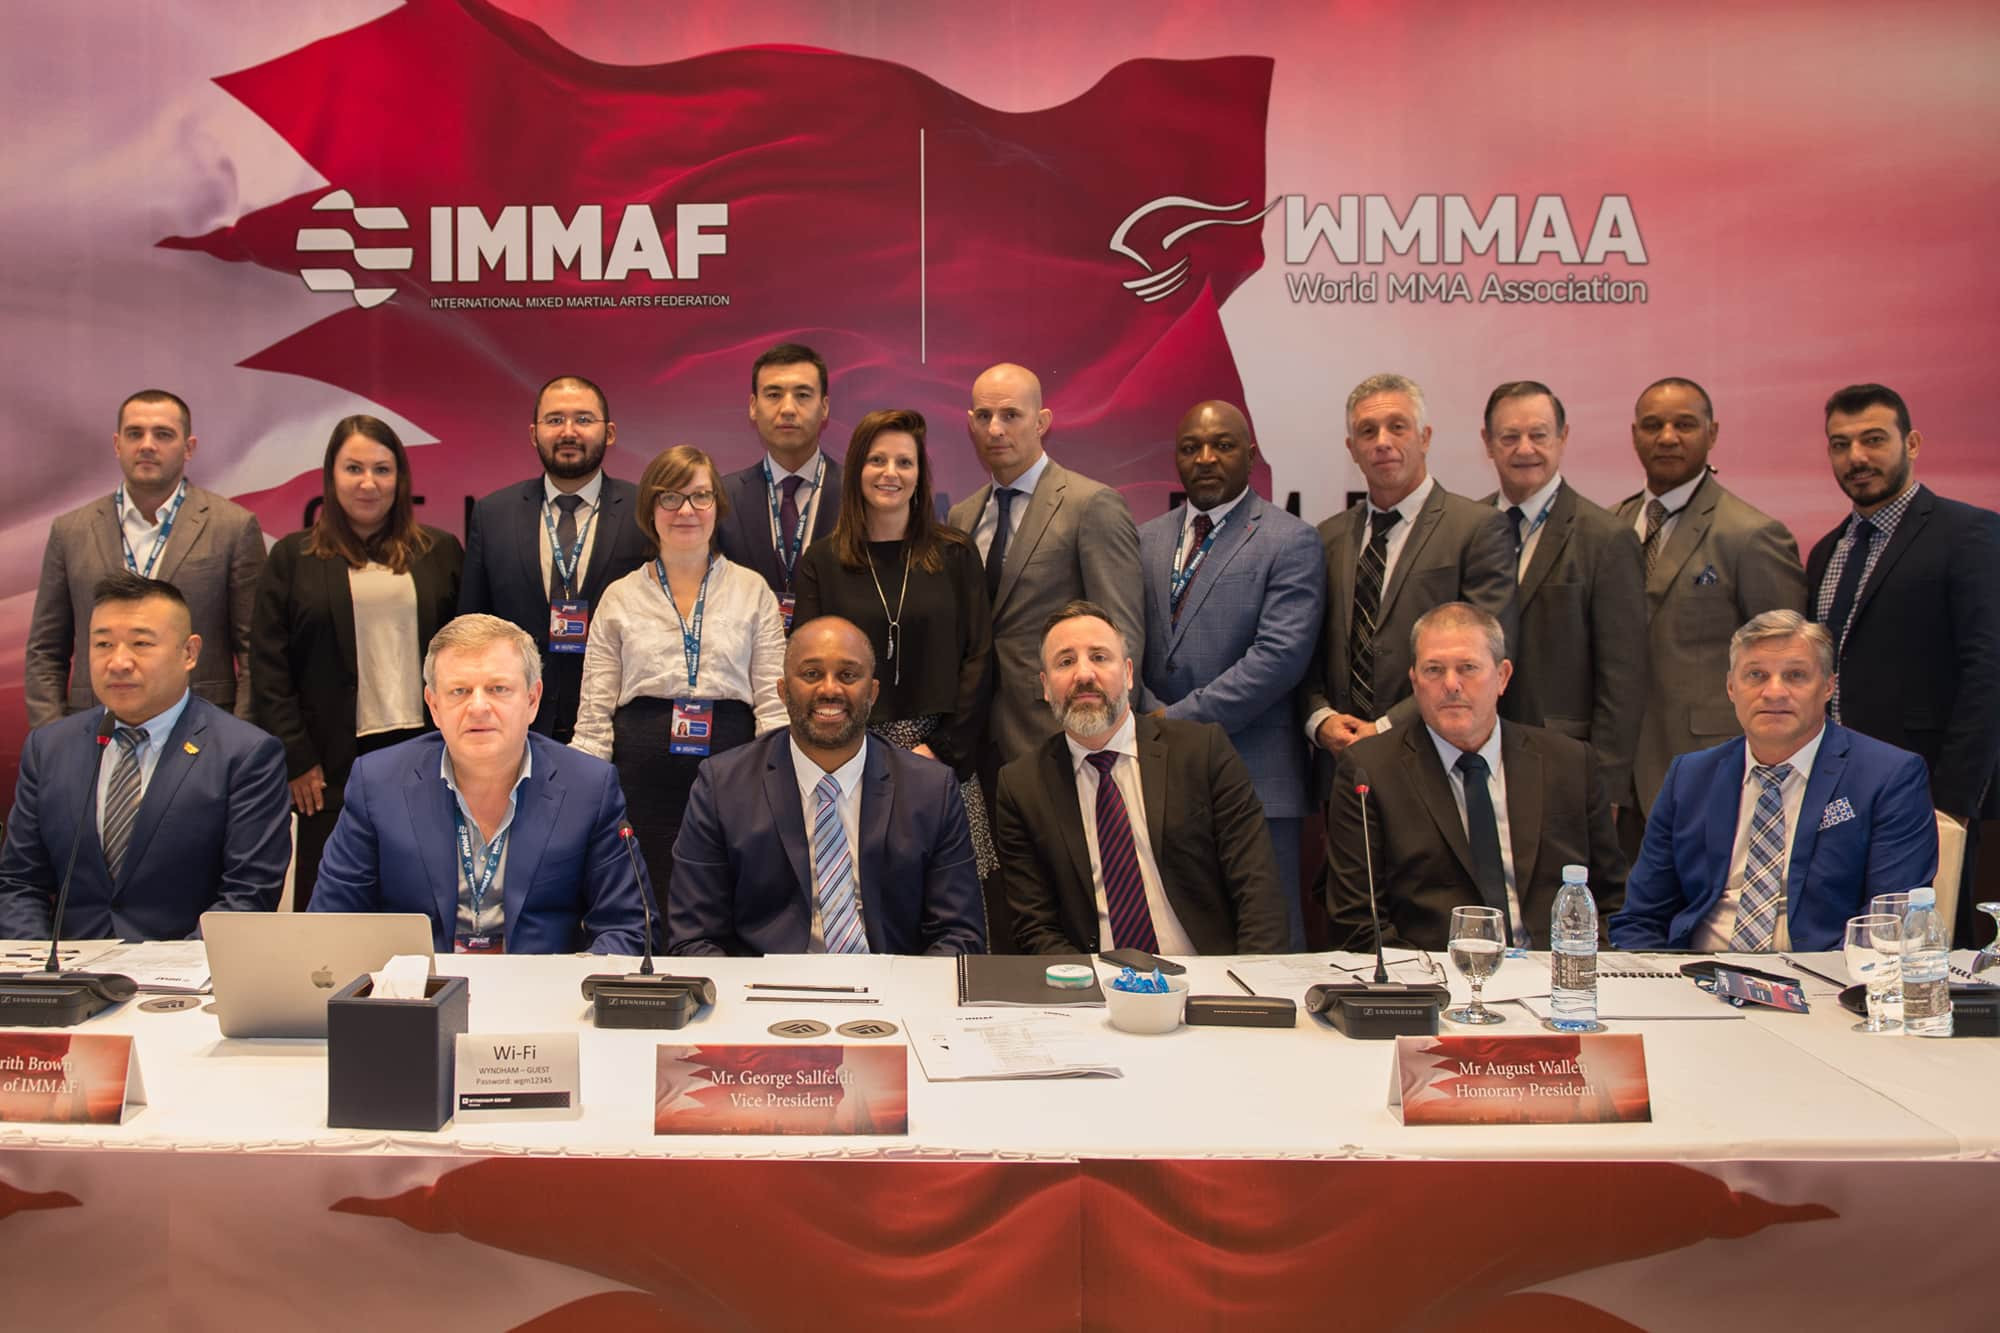 The IMMAF Board is to take part in a good governance training session ©IMMAF